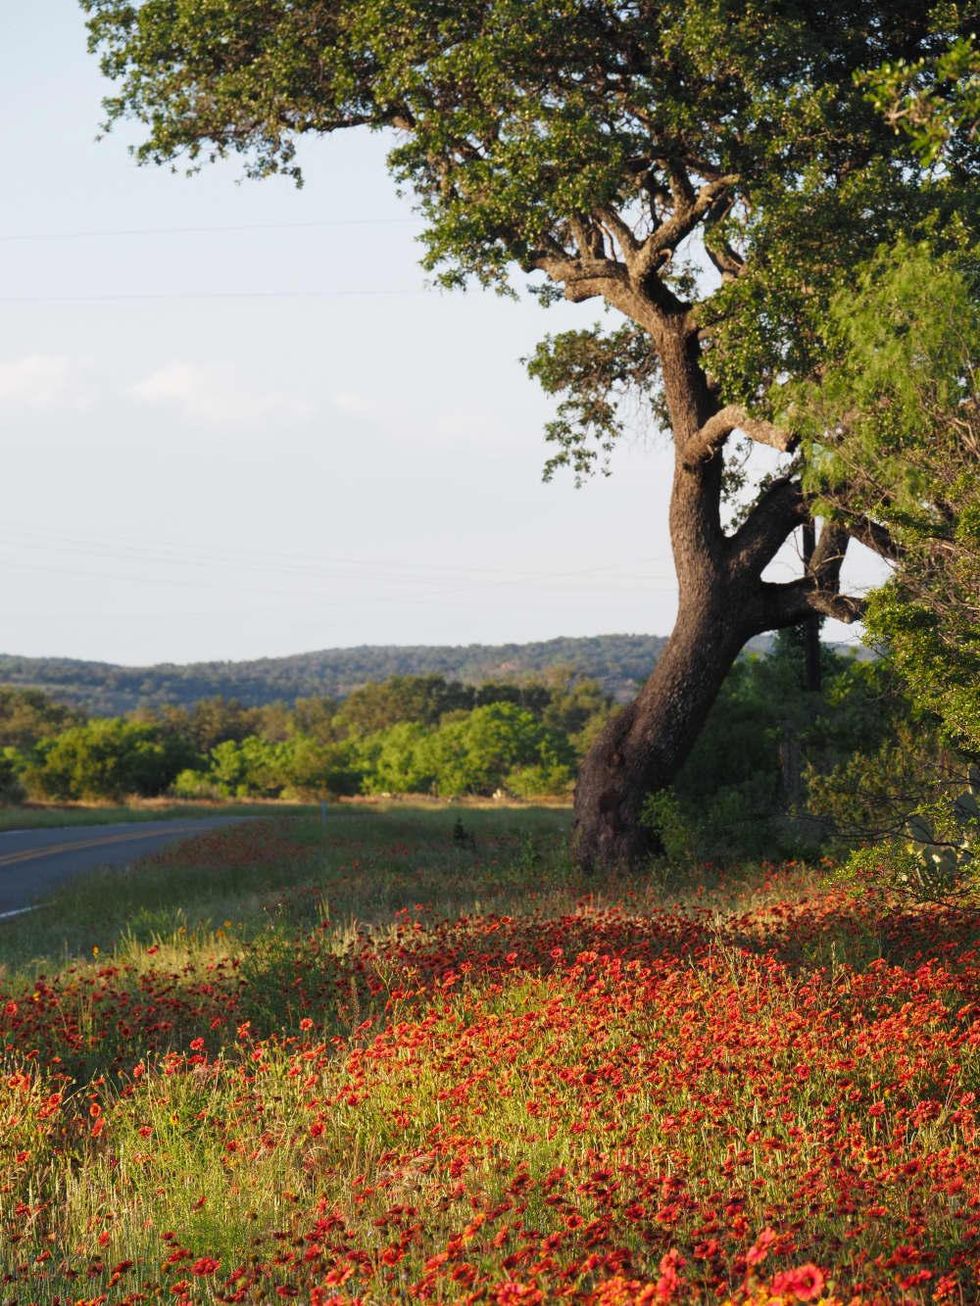 Texas Hill Country wildflowers